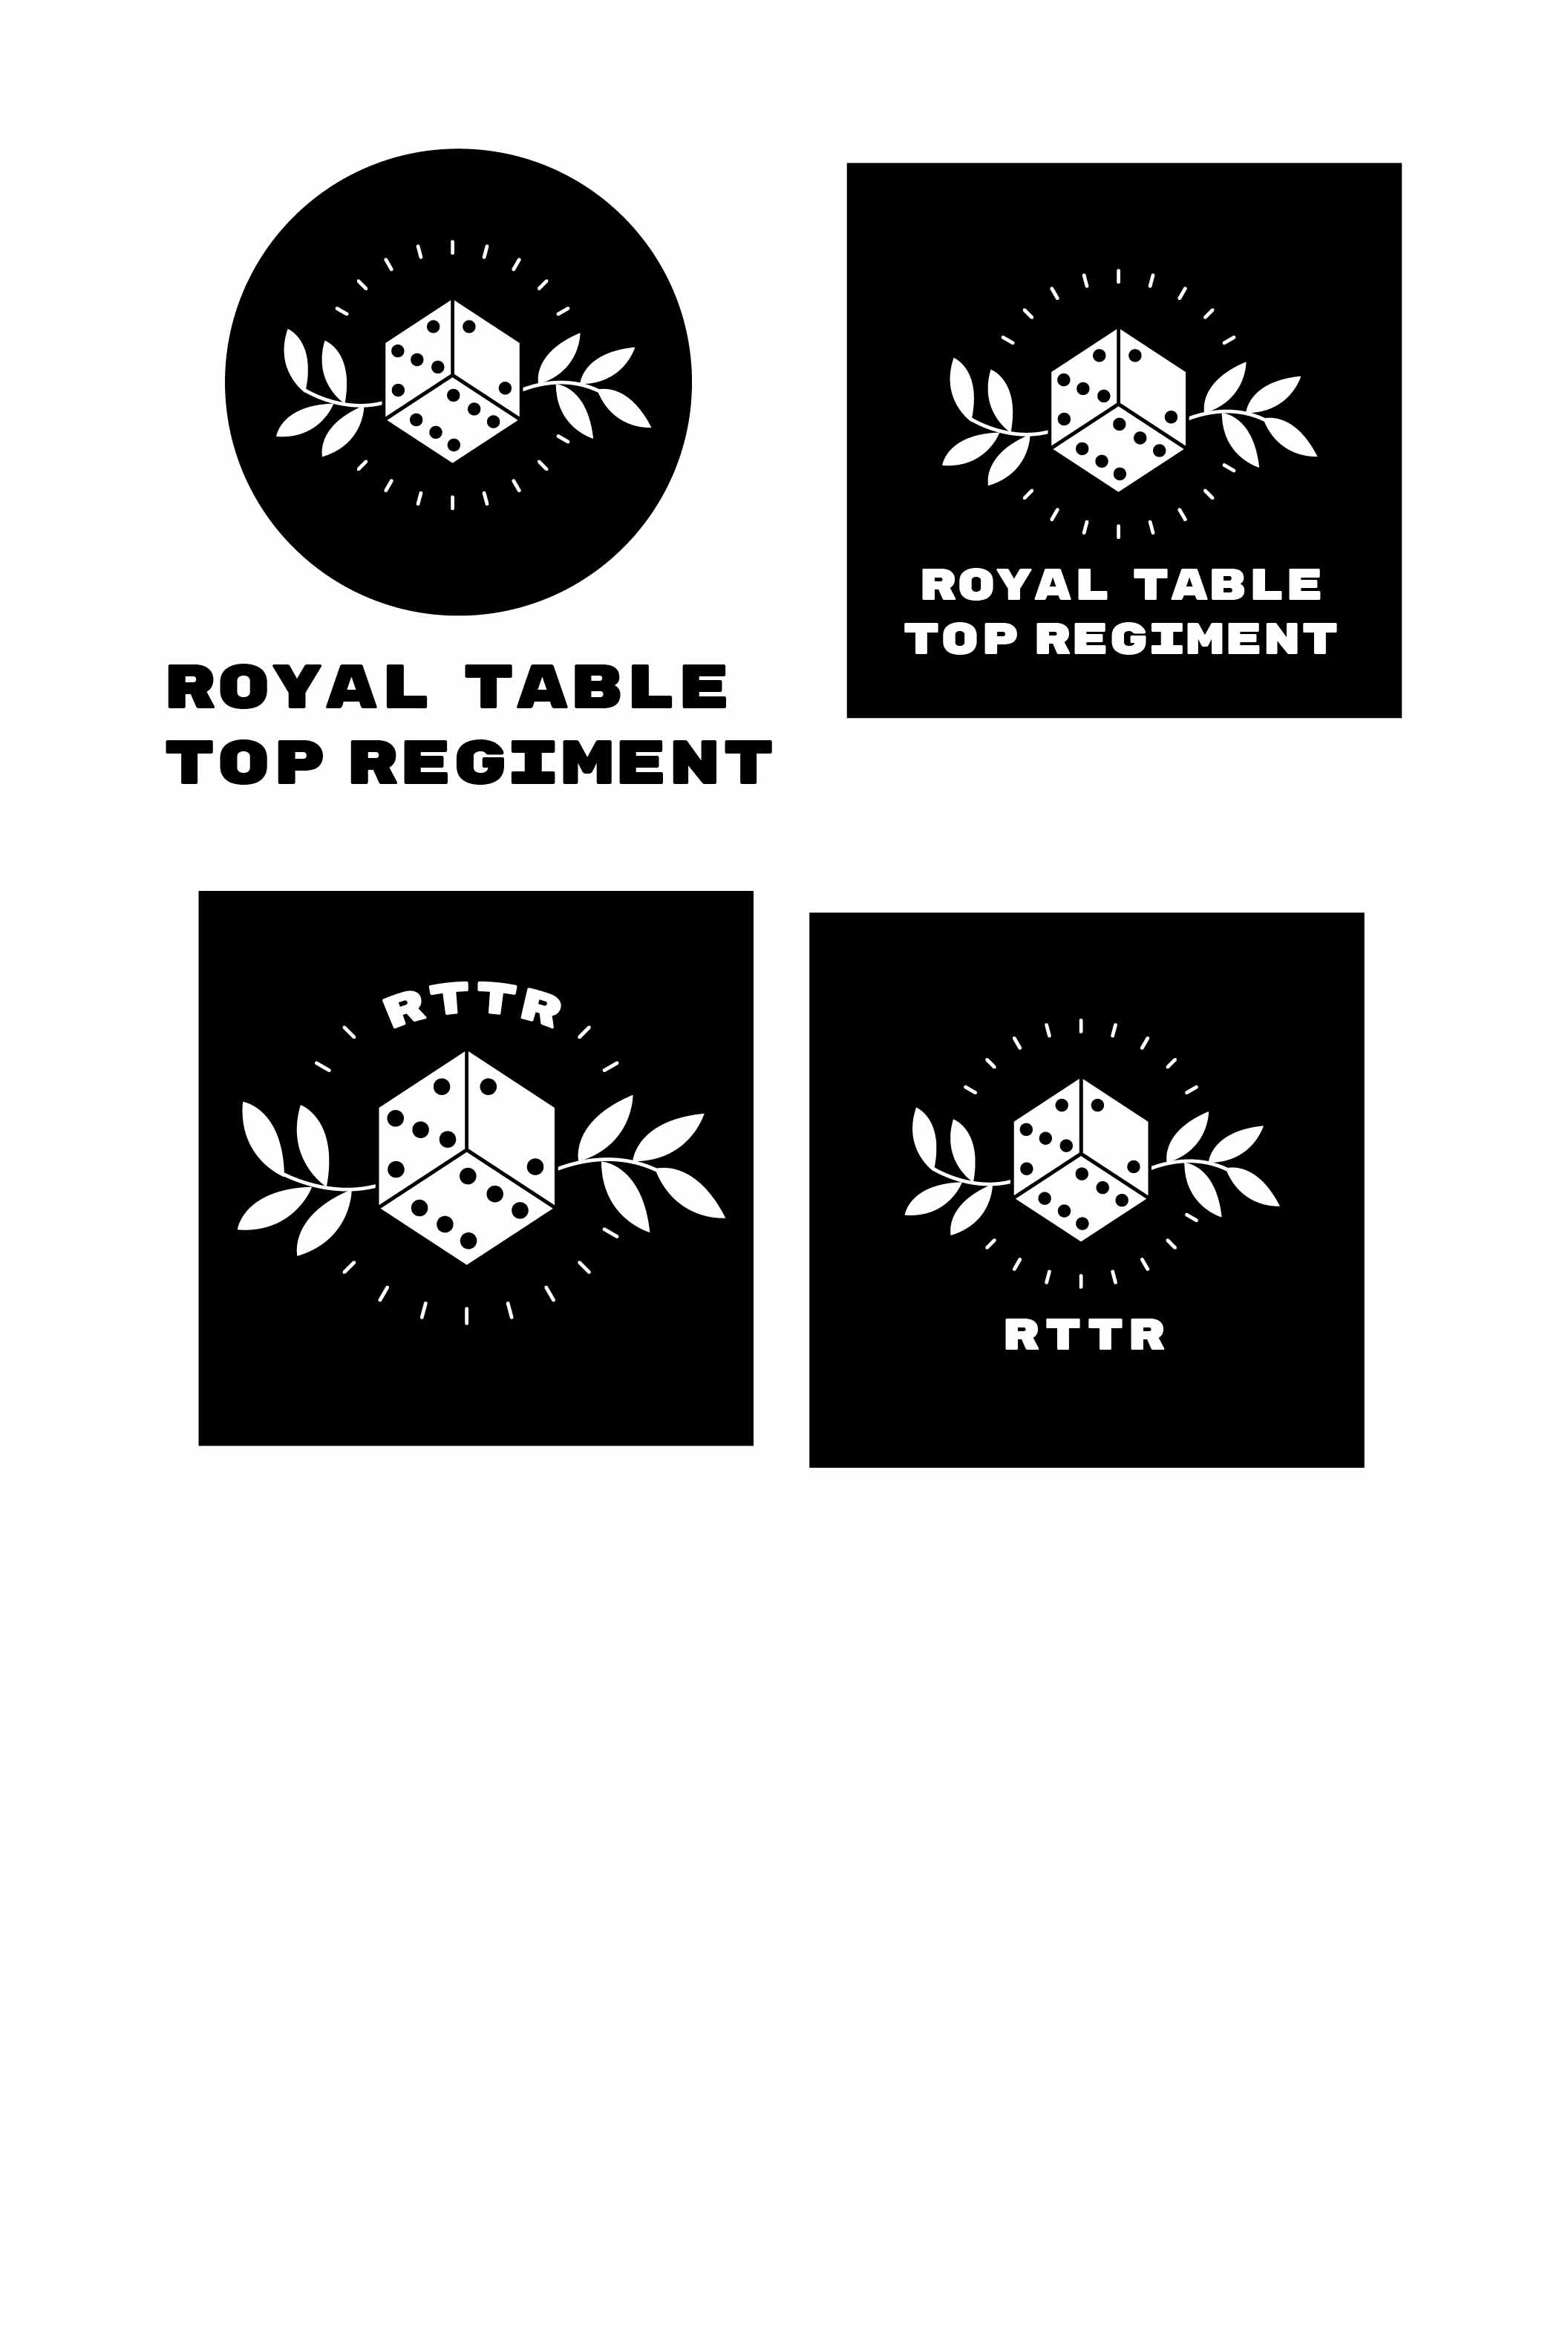 Image of the process of creating the new RTTR logo